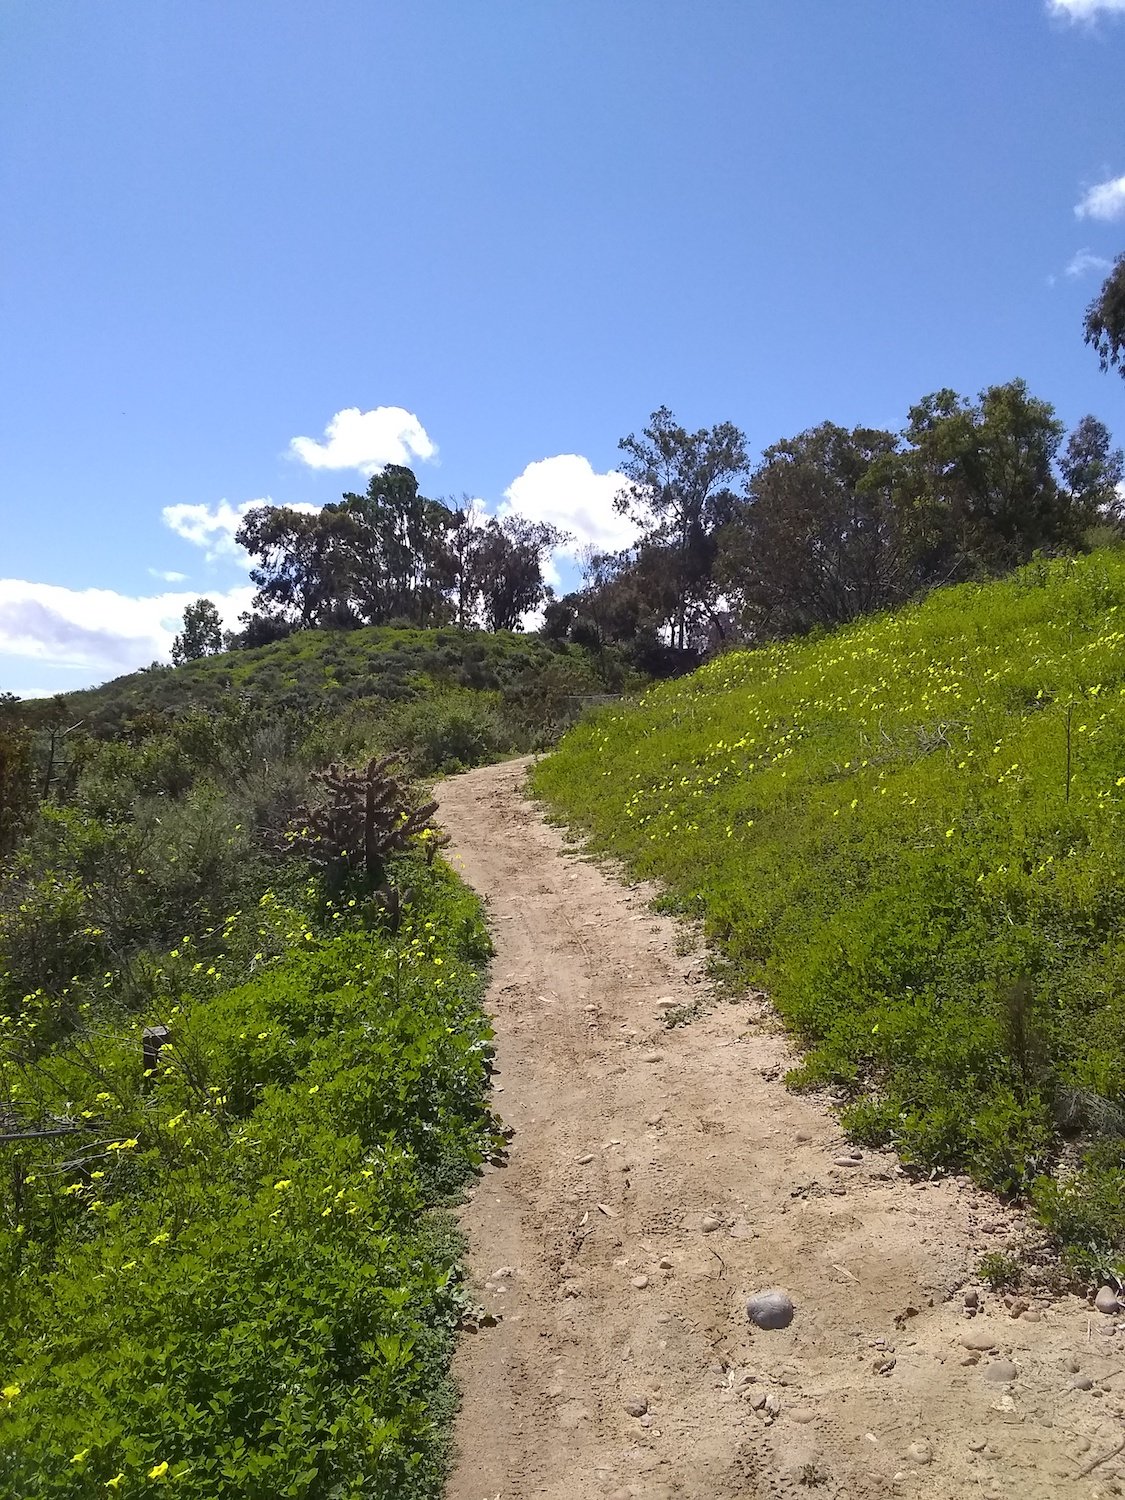 San Diego bike trail called Florida Canyon Trail feating an incline route towards Balboa Park